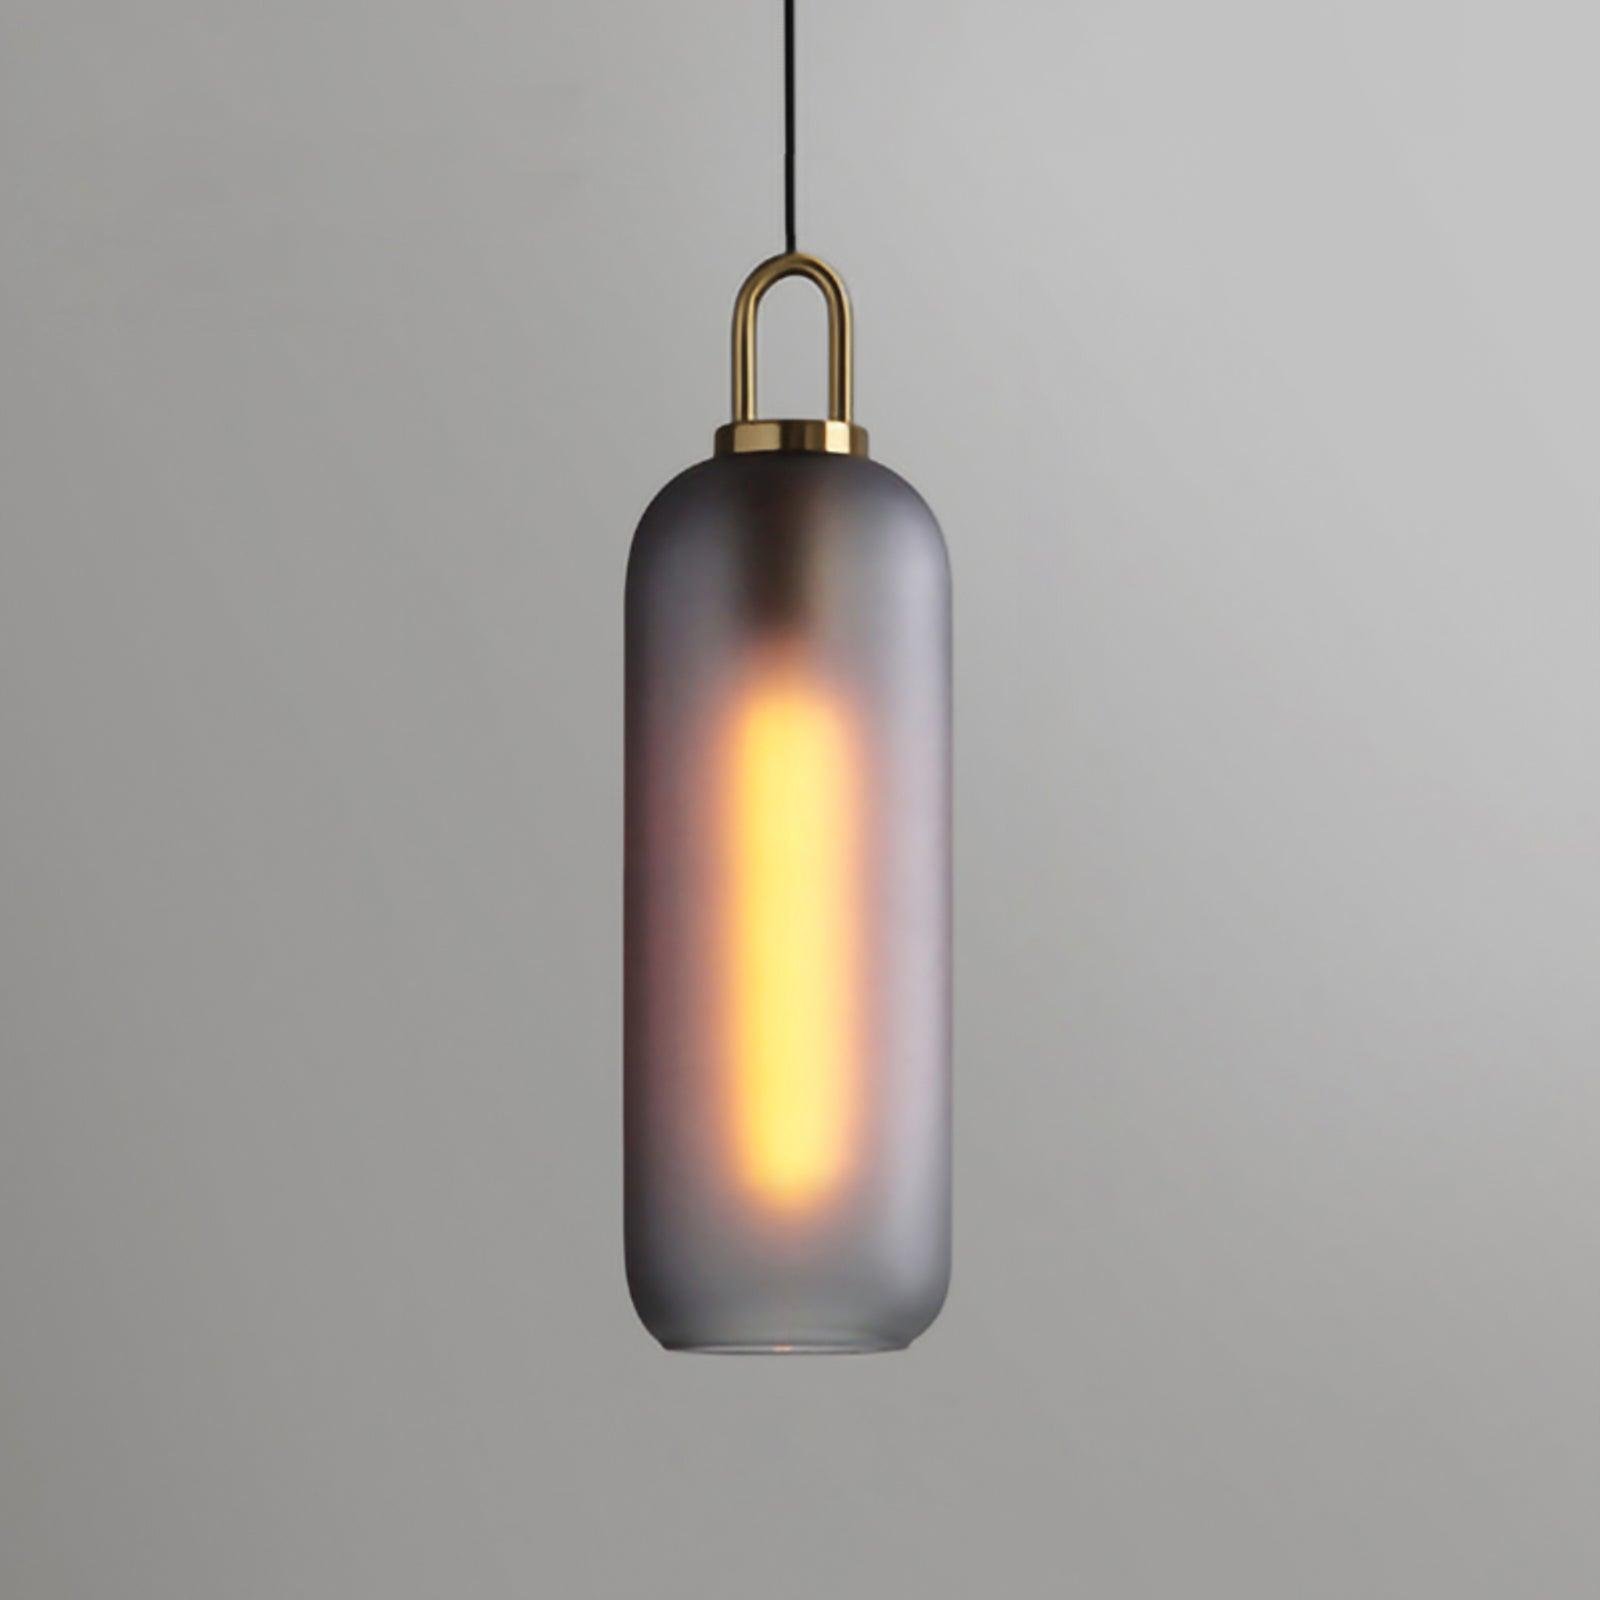 Frosted Glass Pendant Light, Diameter 5.9 inches x Height 19.7 inches (15cm x 50cm)